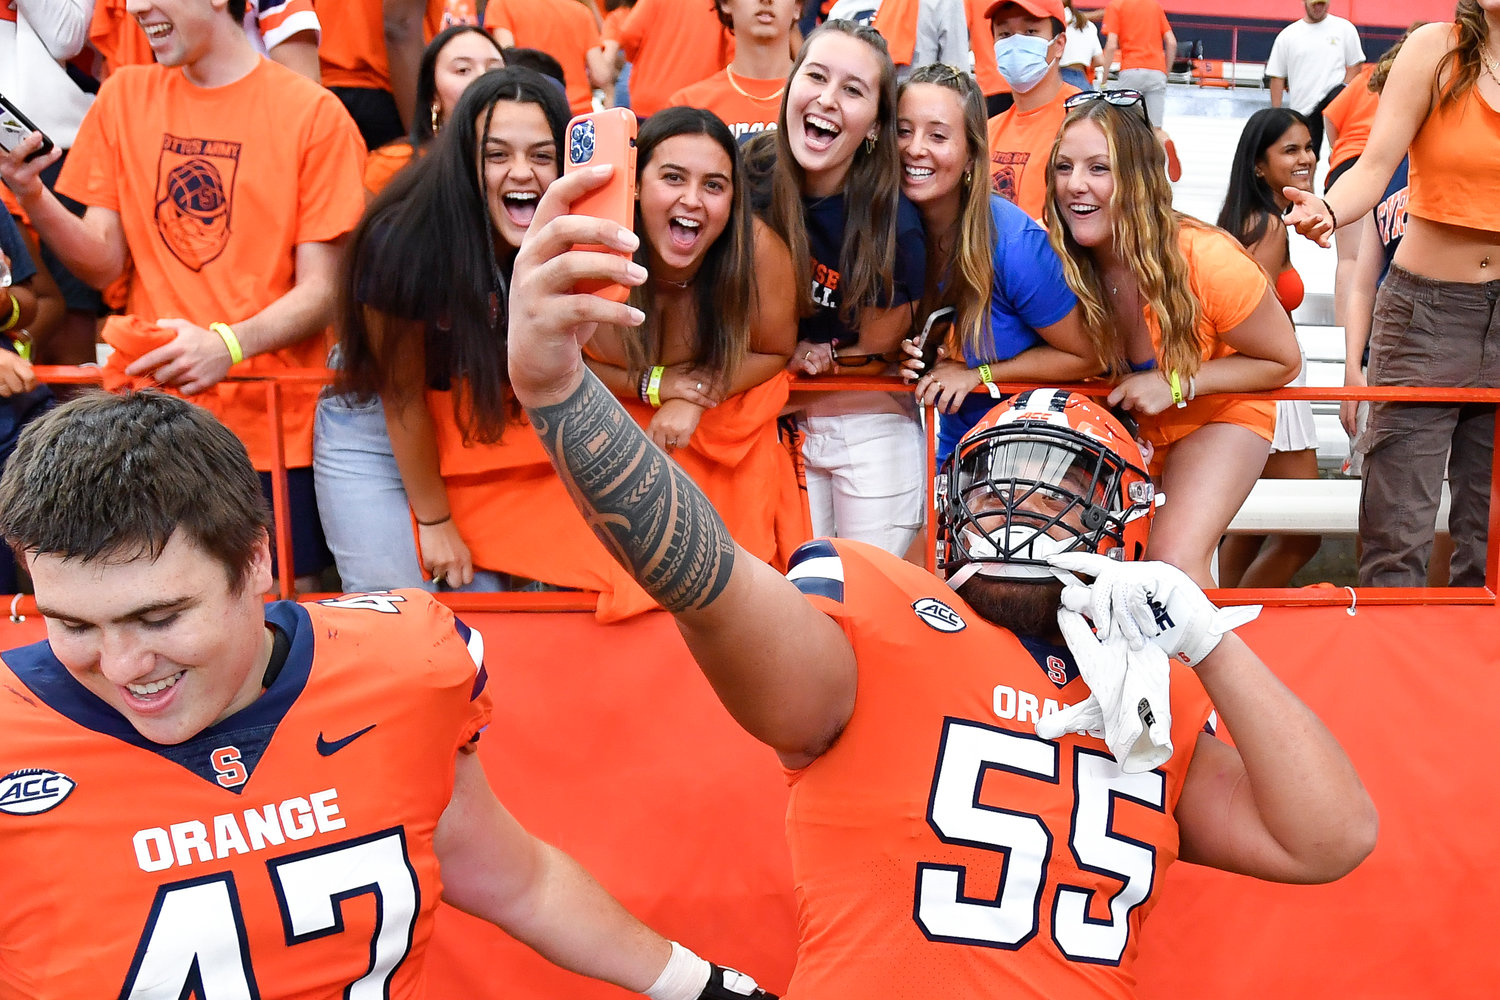 Syracuse offensive lineman Josh Ilaoa (55) takes a selfie with fans after beating Purdue in an NCAA college football game in Syracuse, N.Y., Saturday, Sept. 17, 2022. Syracuse won 32-29.